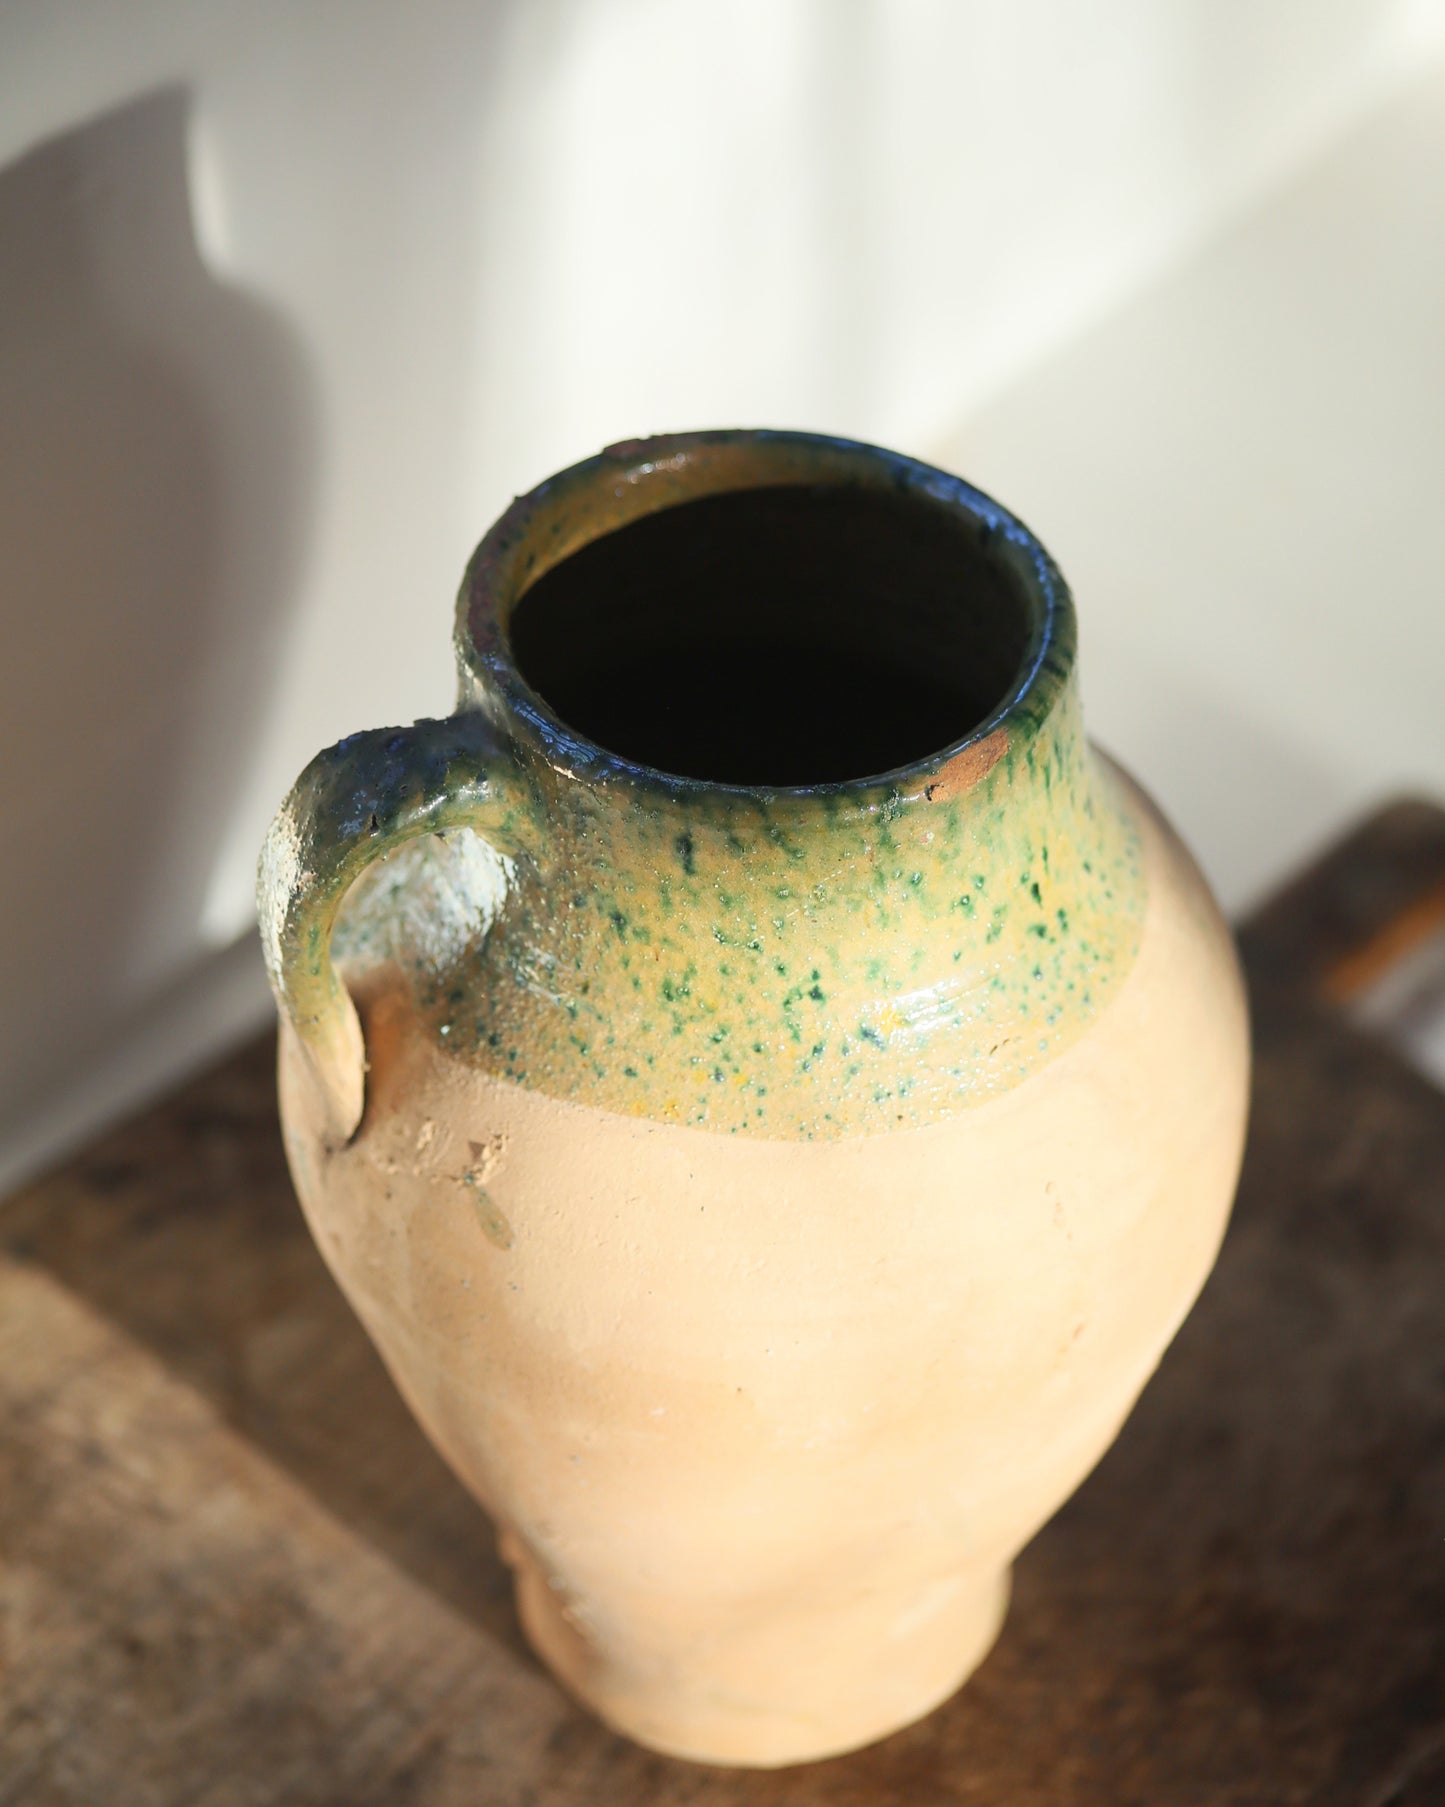 Textured detail and condition of antique terracotta pitcher pot